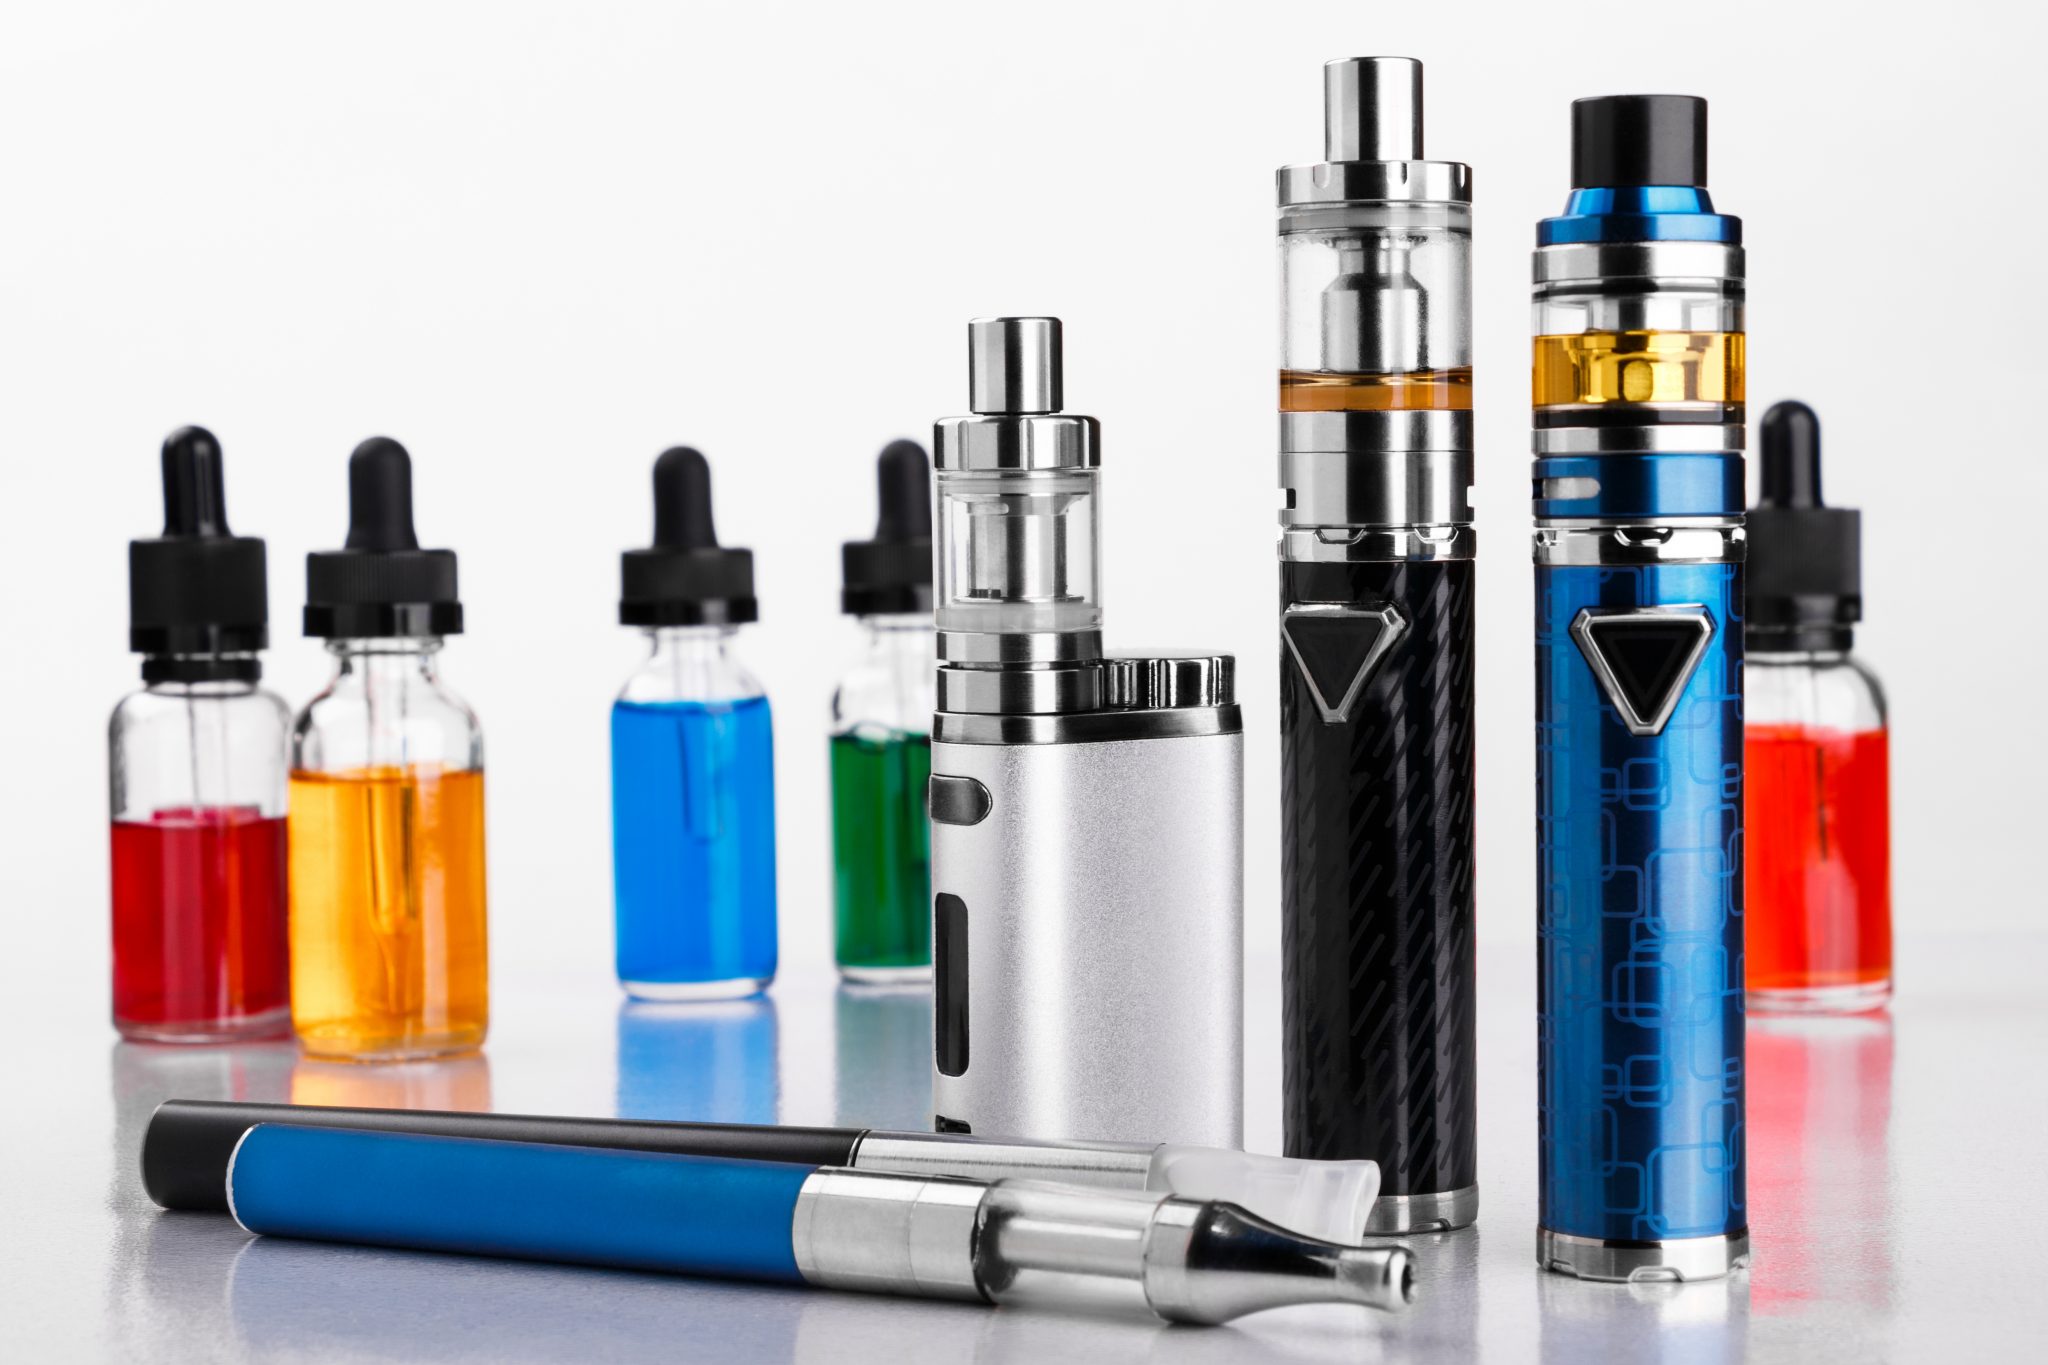 Modern electronic cigarettes and bottles with assorted vape liquid on white background